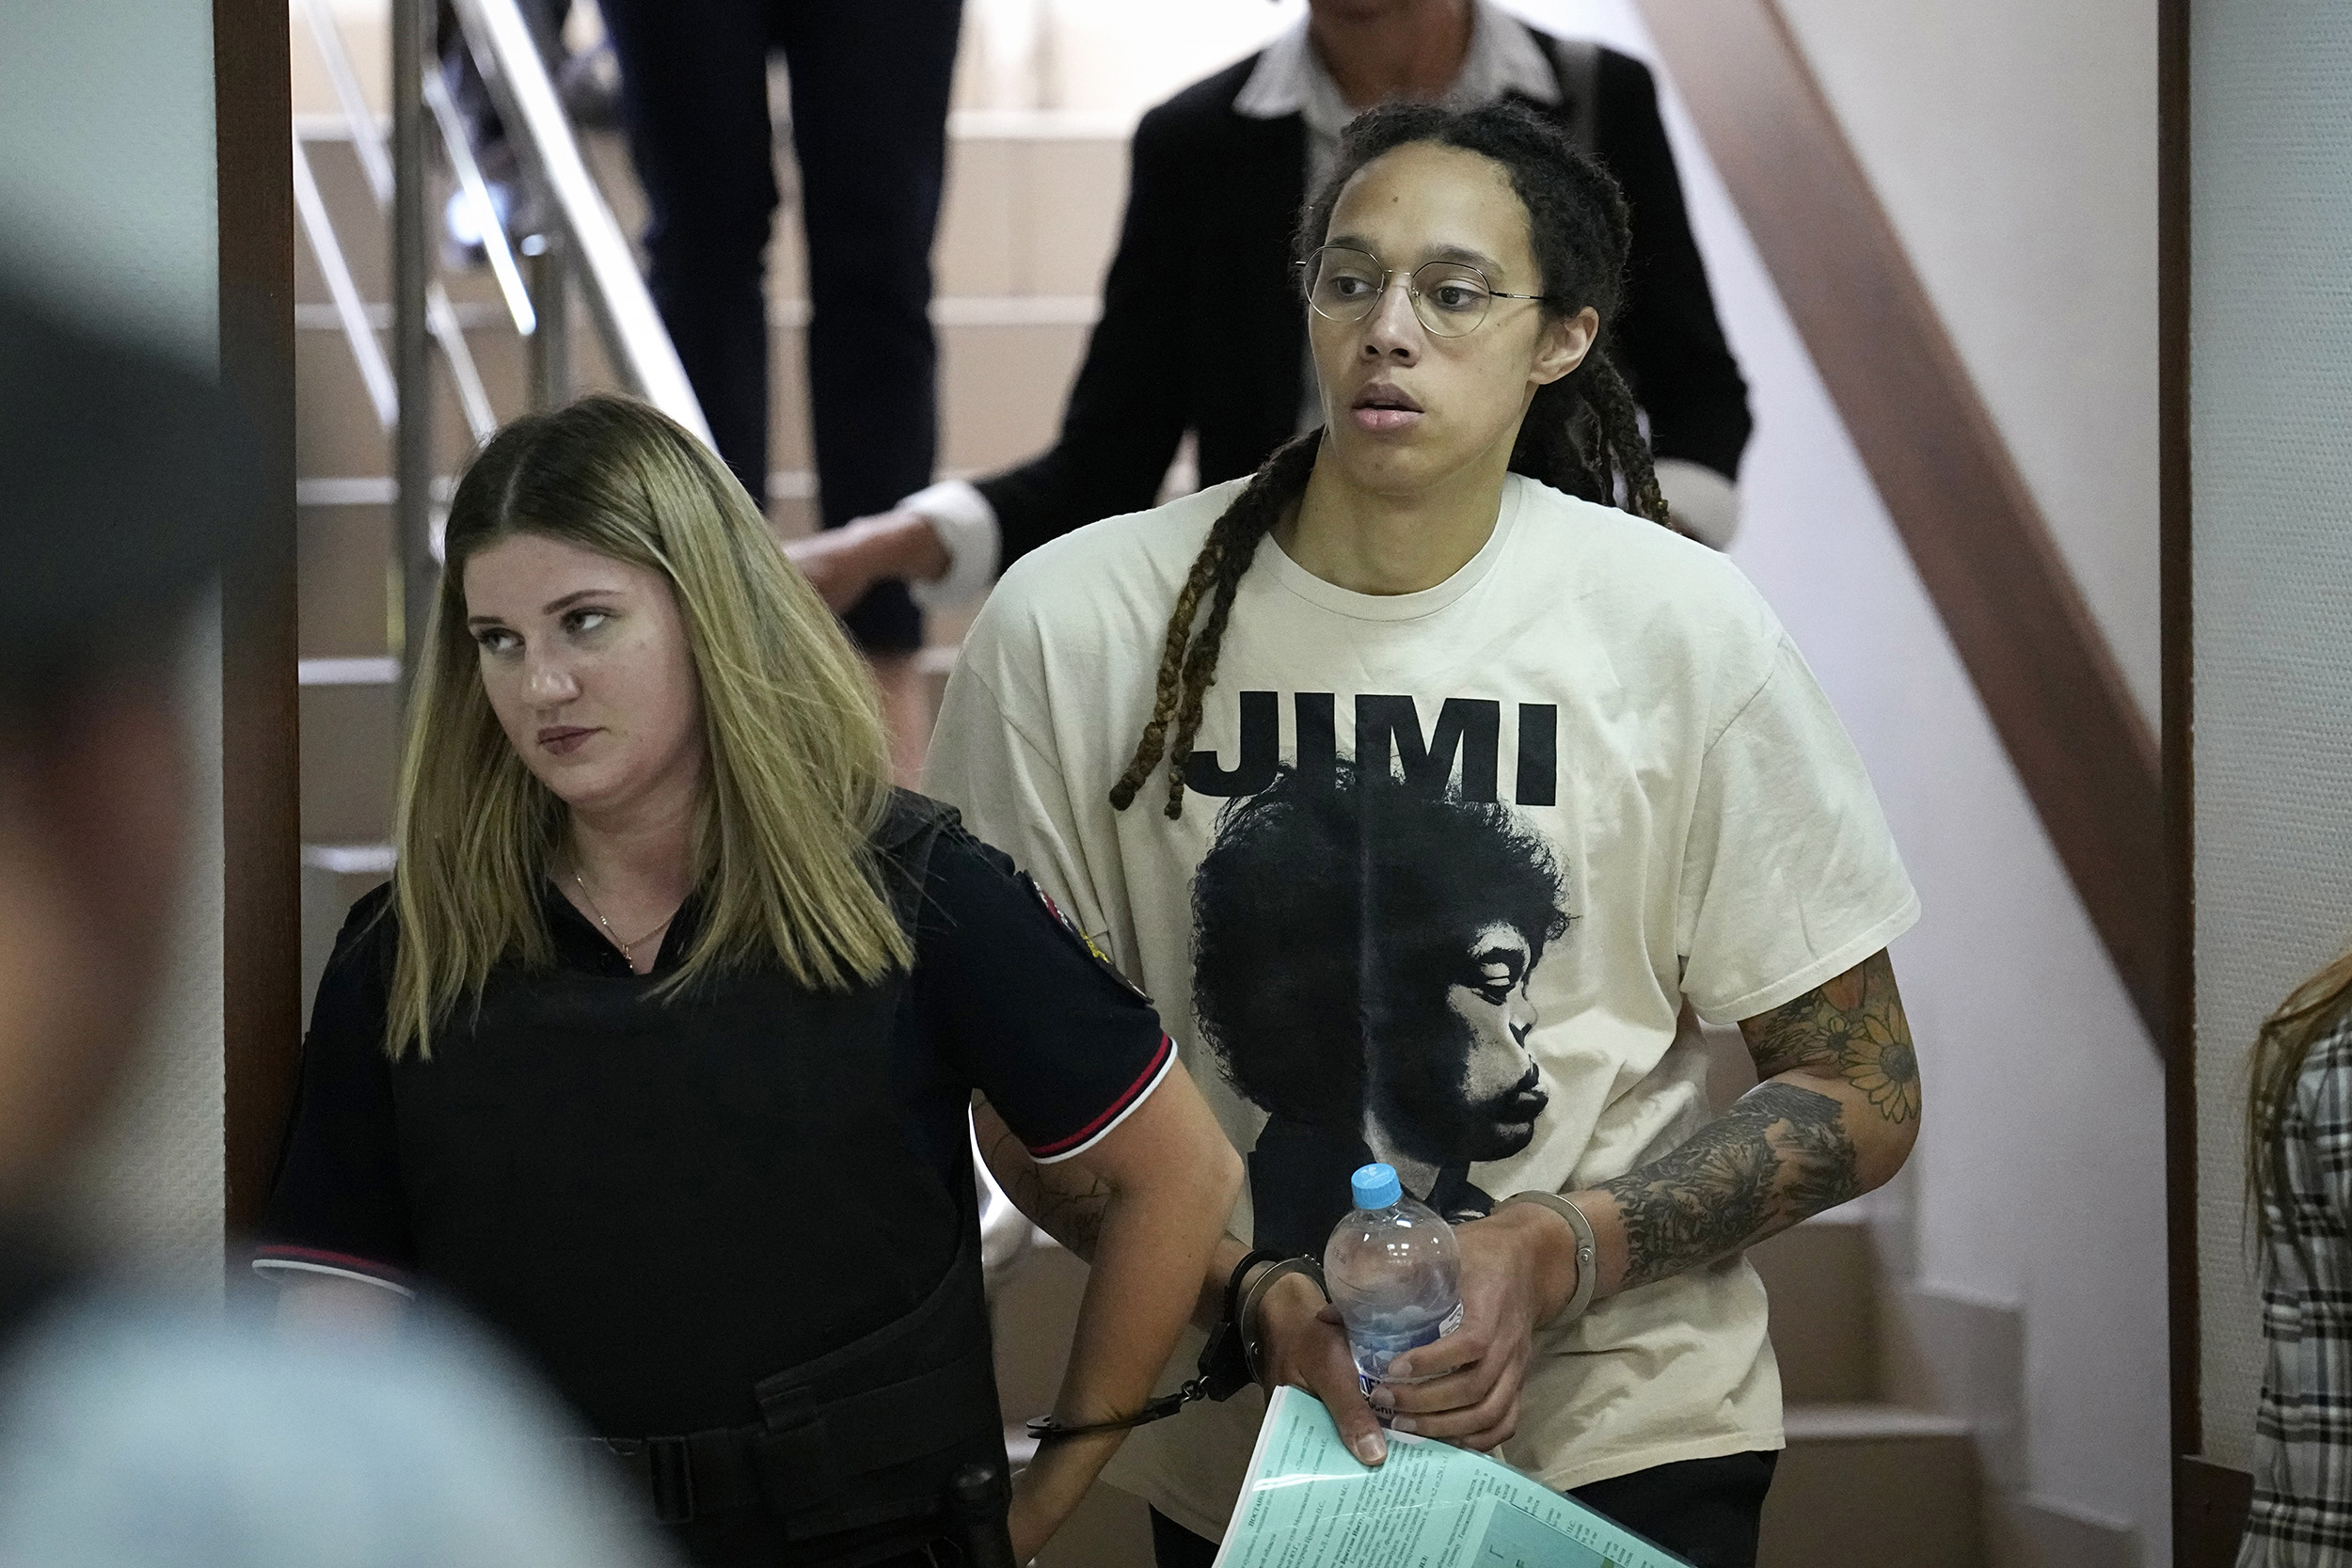 WNBA star and two-time Olympic gold medalist Brittney Griner is escorted to a courtroom for a hearing, in Khimki just outside Moscow, Russia, on July 1.